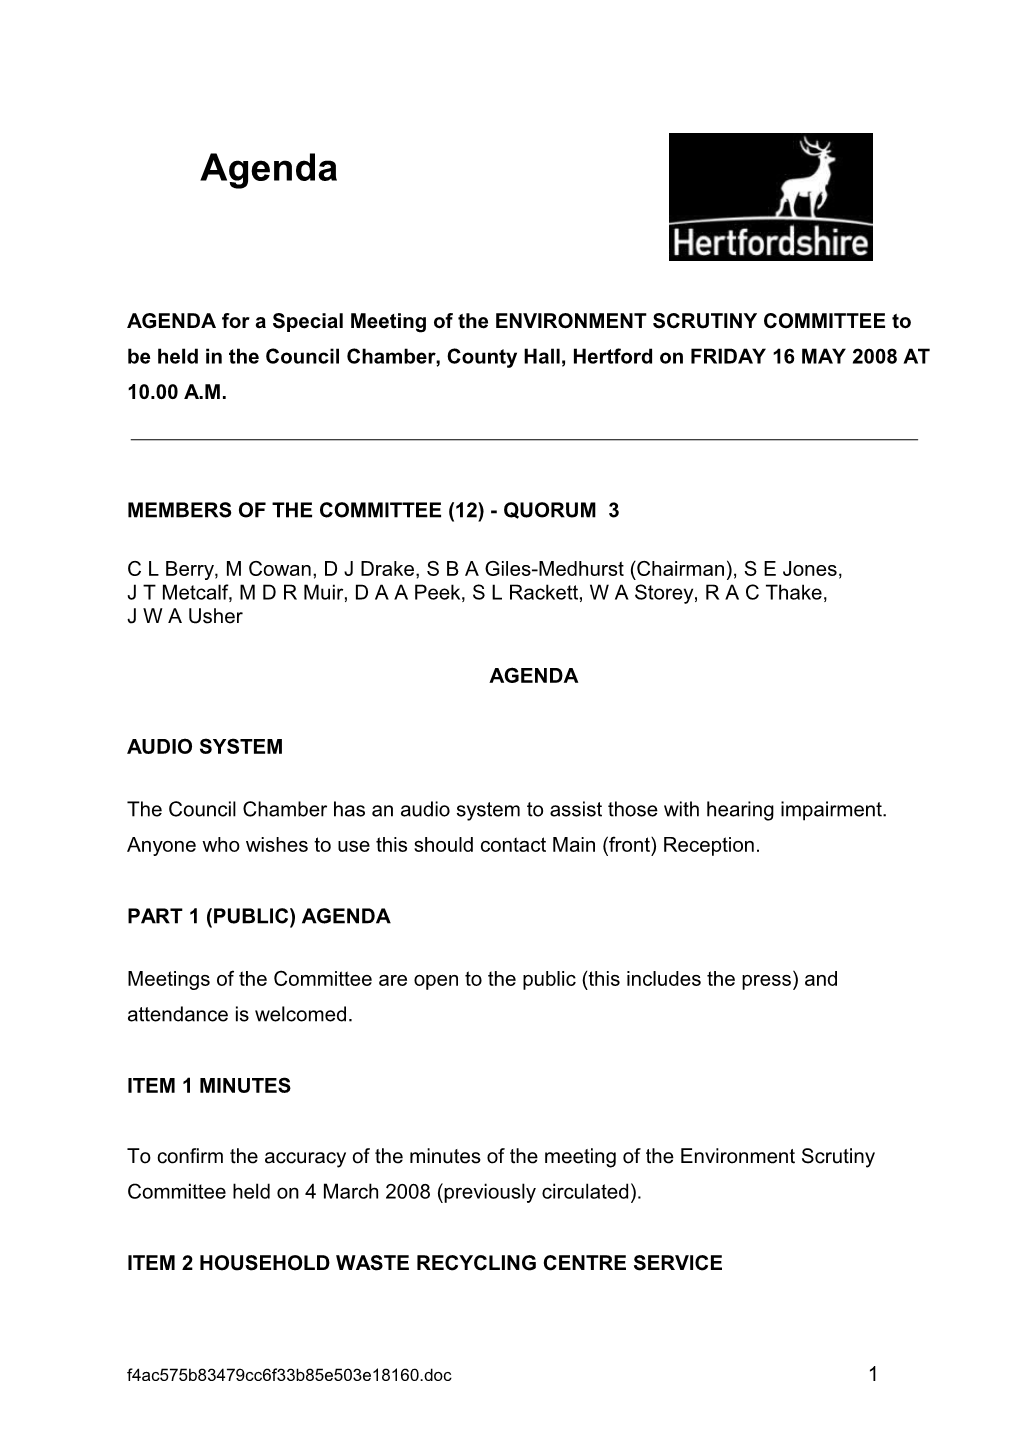 AGENDA for a Meeting of the RESOURCES SCRUTINY COMMITTEE in The